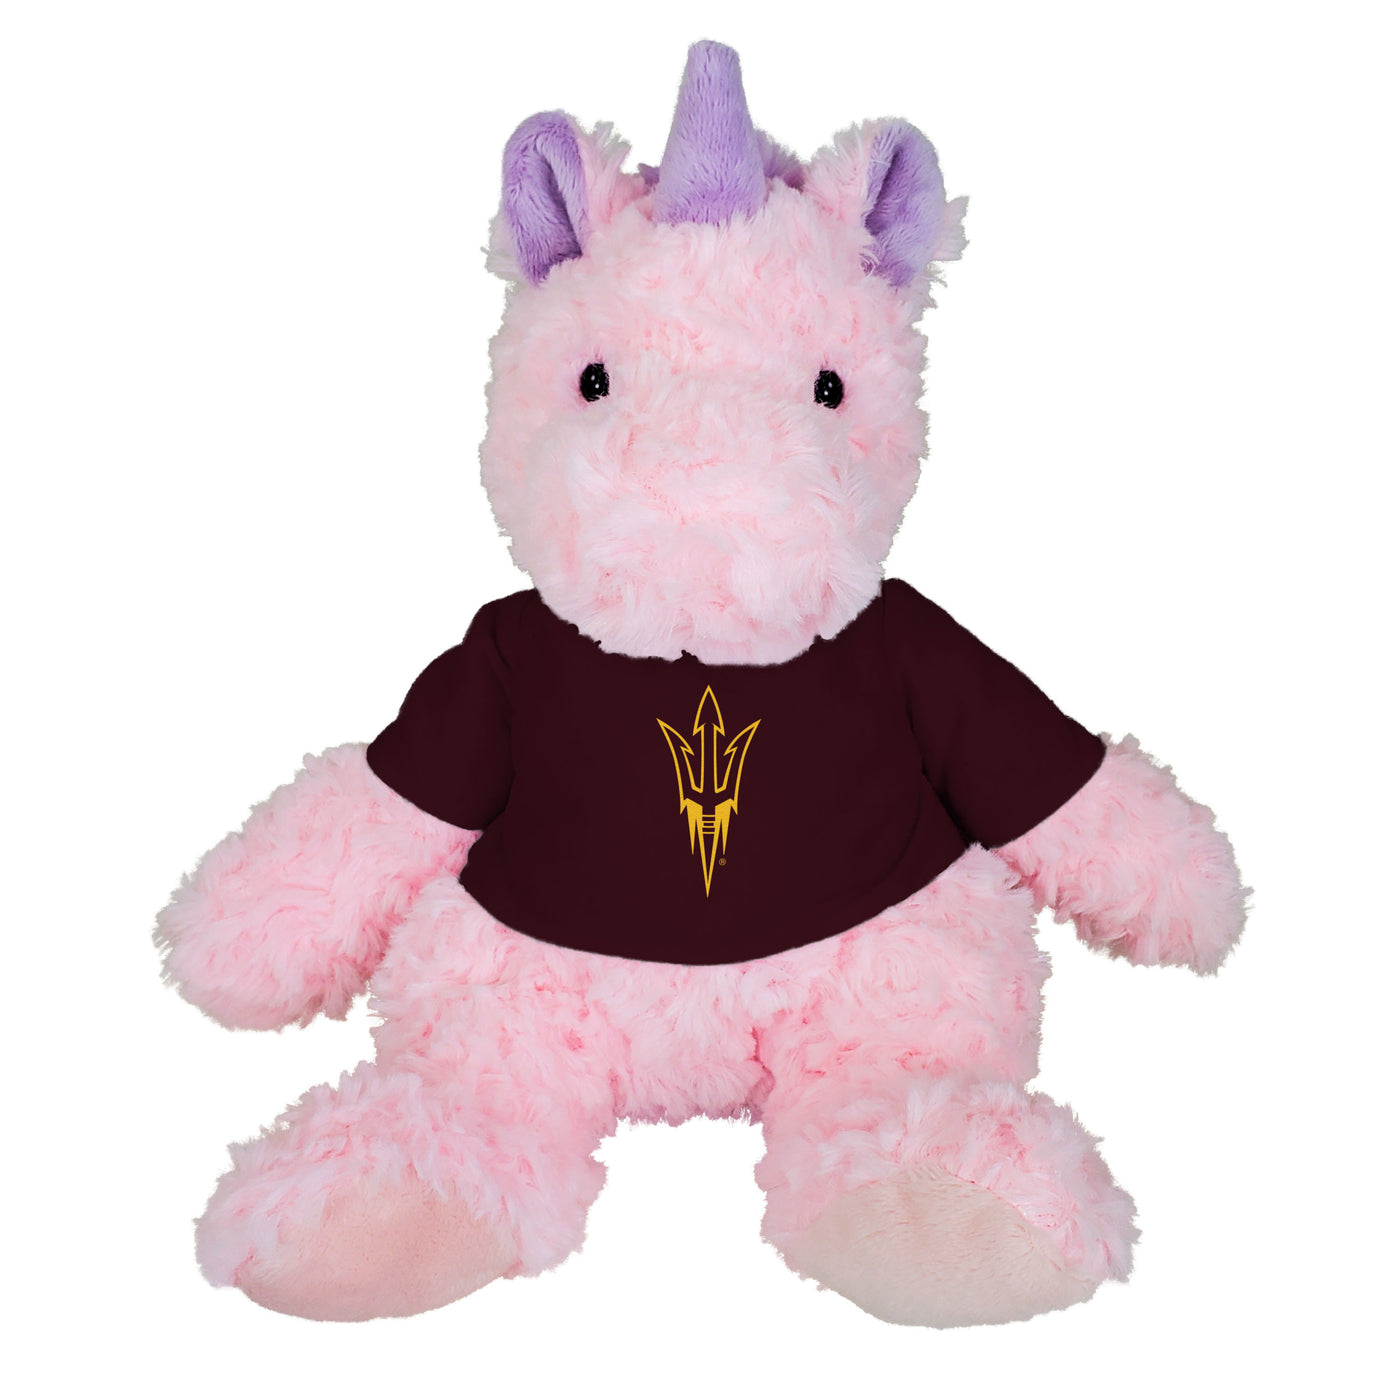 ASU pink and purple unicorn wearing a maroon shirt with a gold pitchfork outline. 